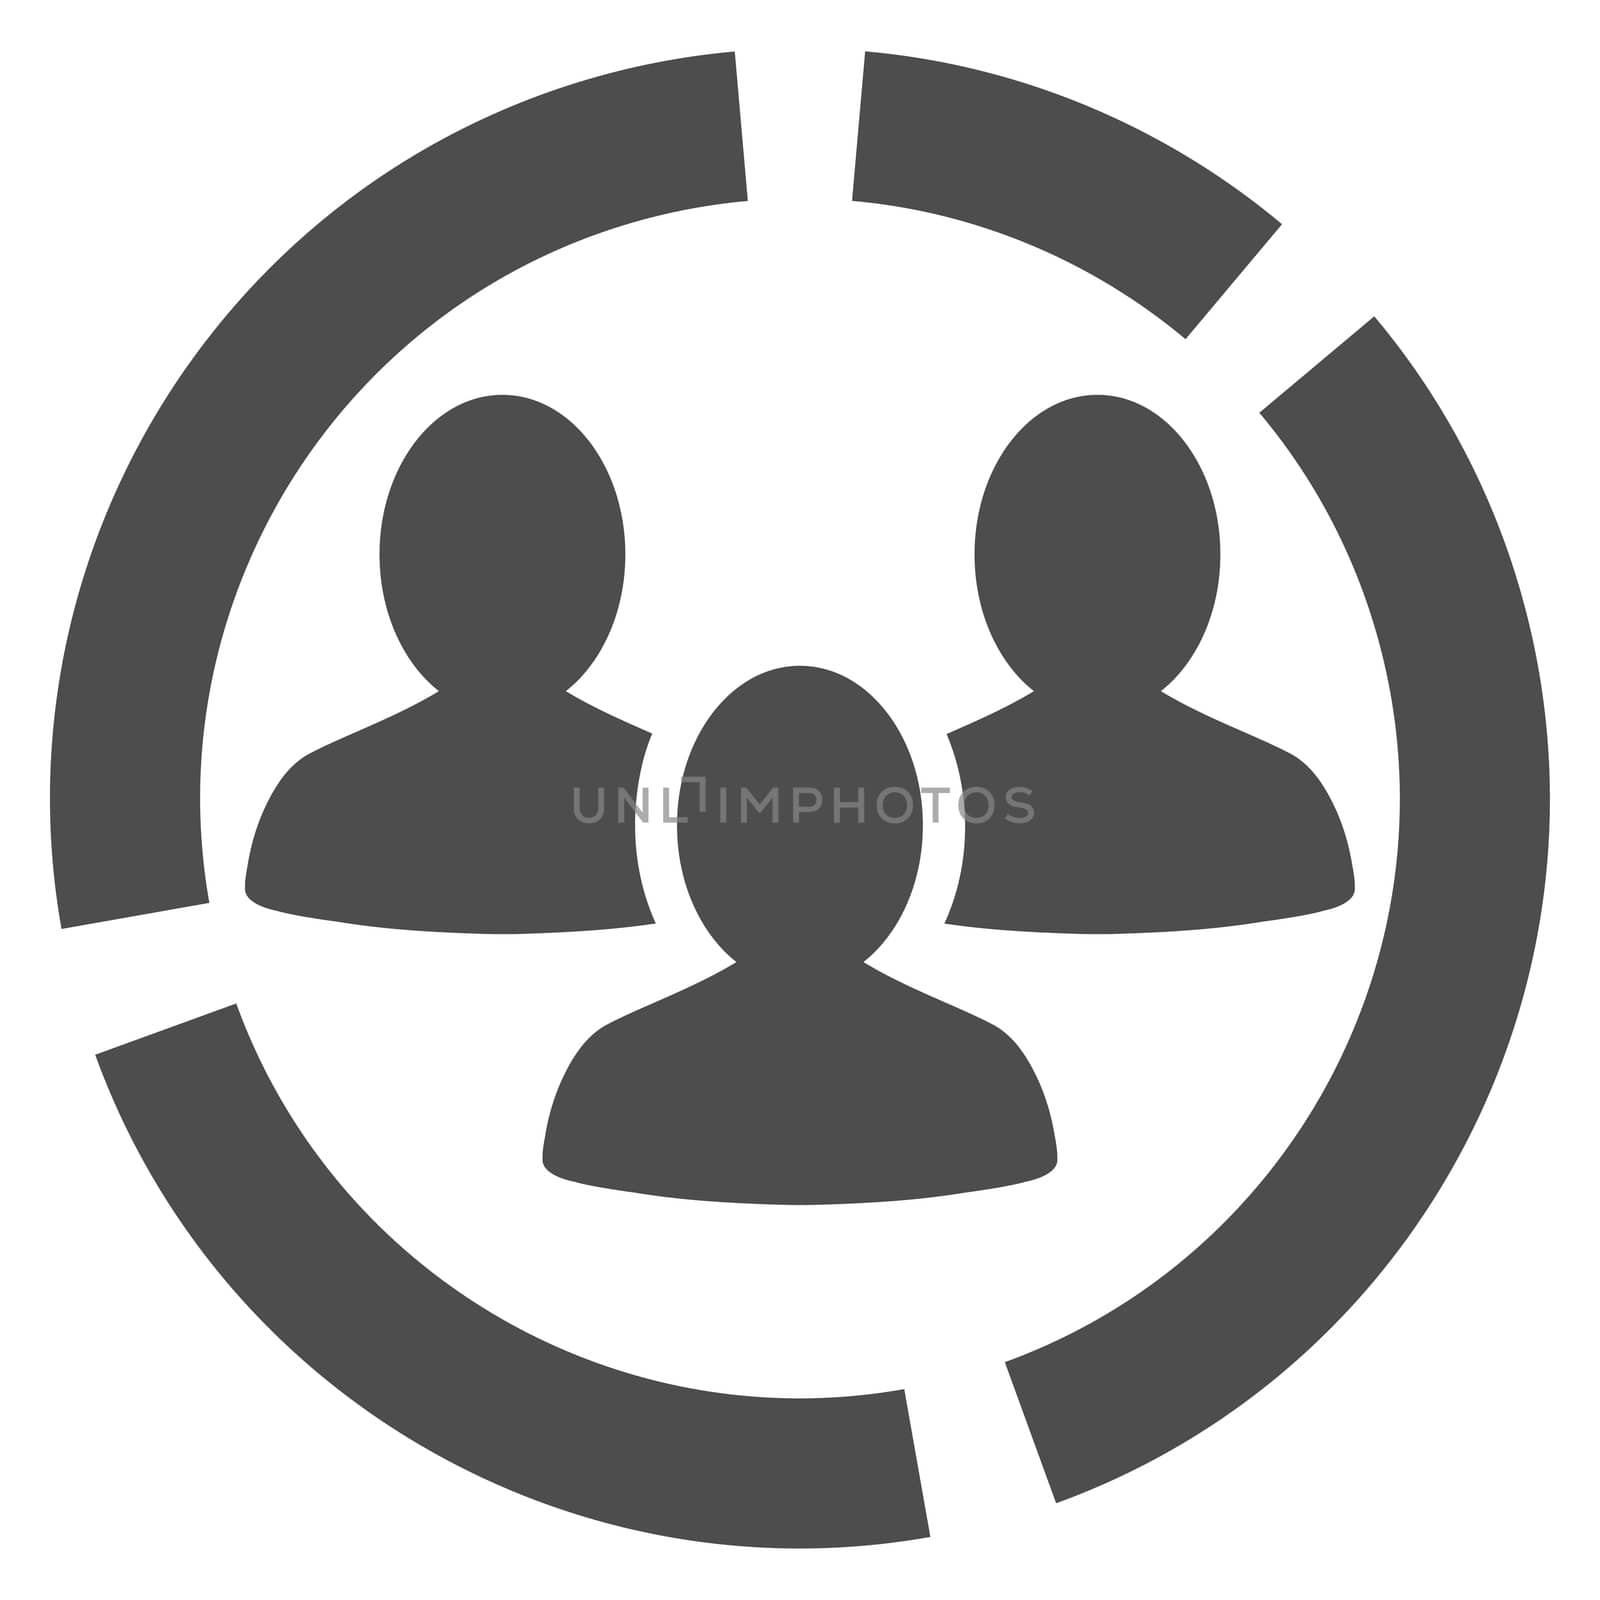 Demography diagram icon. Glyph style is flat symbol, gray color, rounded angles, white background.